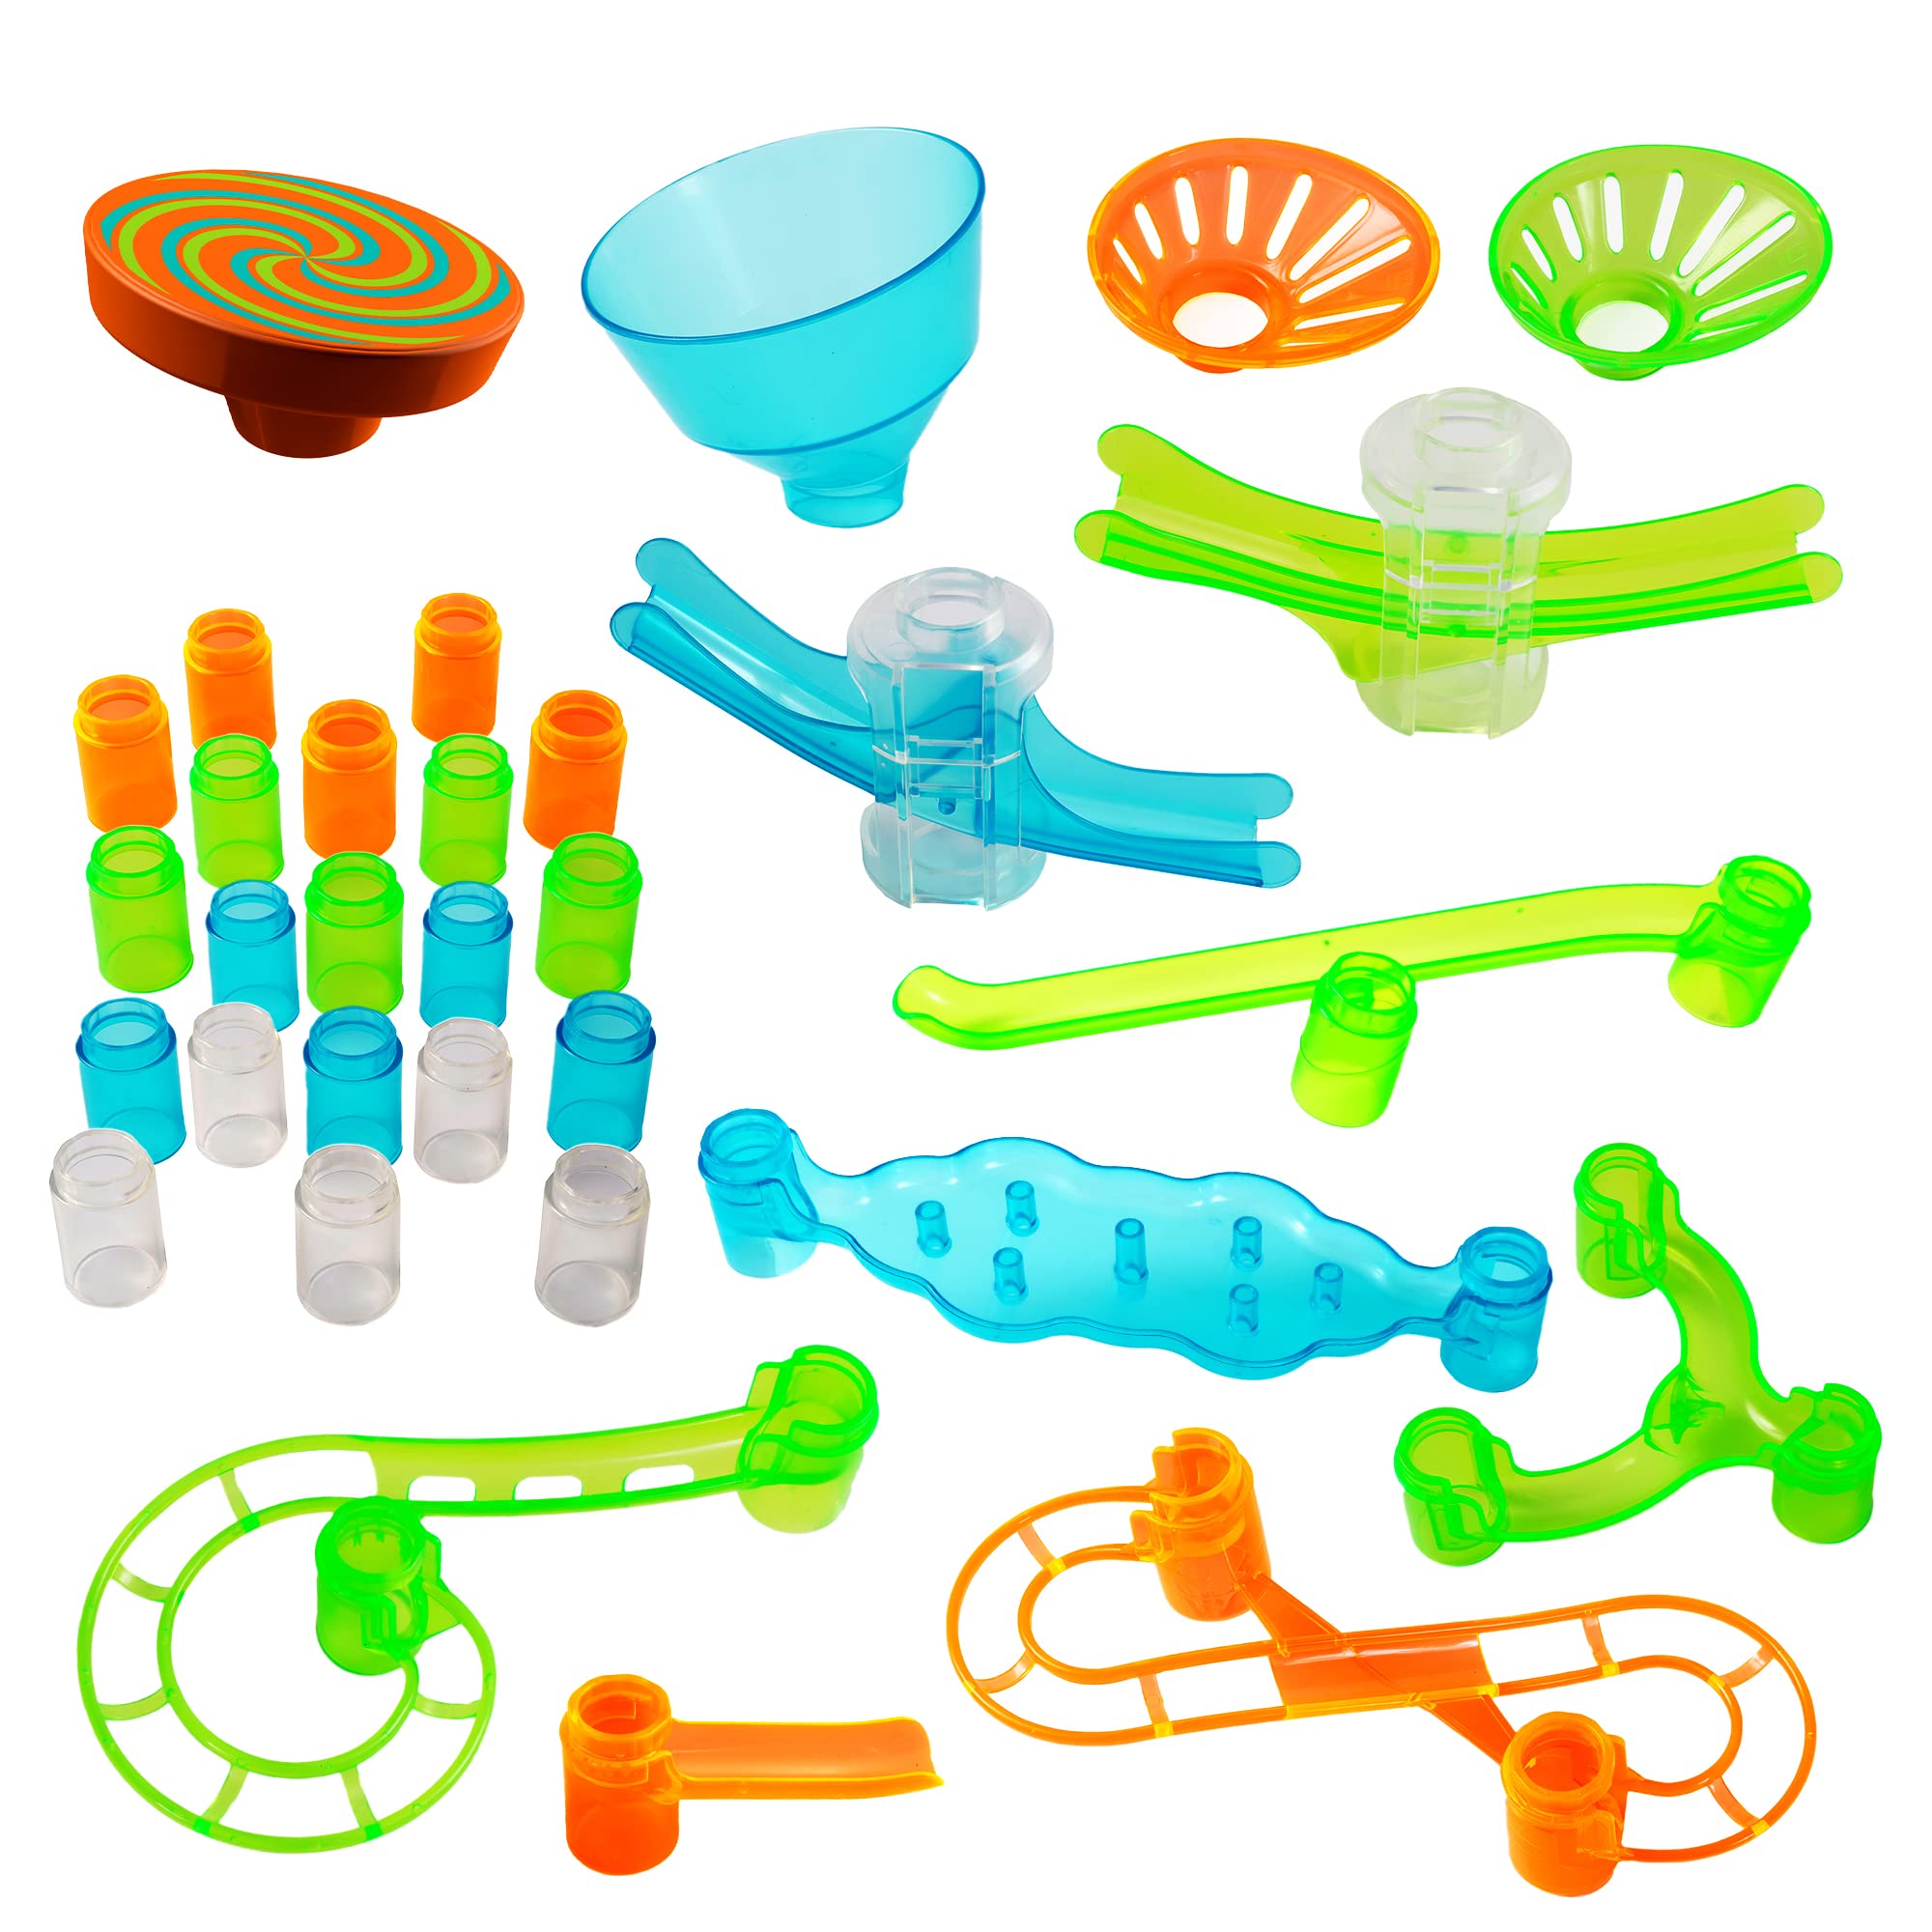 Marble Genius Marble Run Stunts Booster Set: 30 Pieces Total, 9 Action Pieces Including New Patented Trampoline, Includes Free Online App and Full-Color Instruction Booklet, Made for Ages 5 and Up